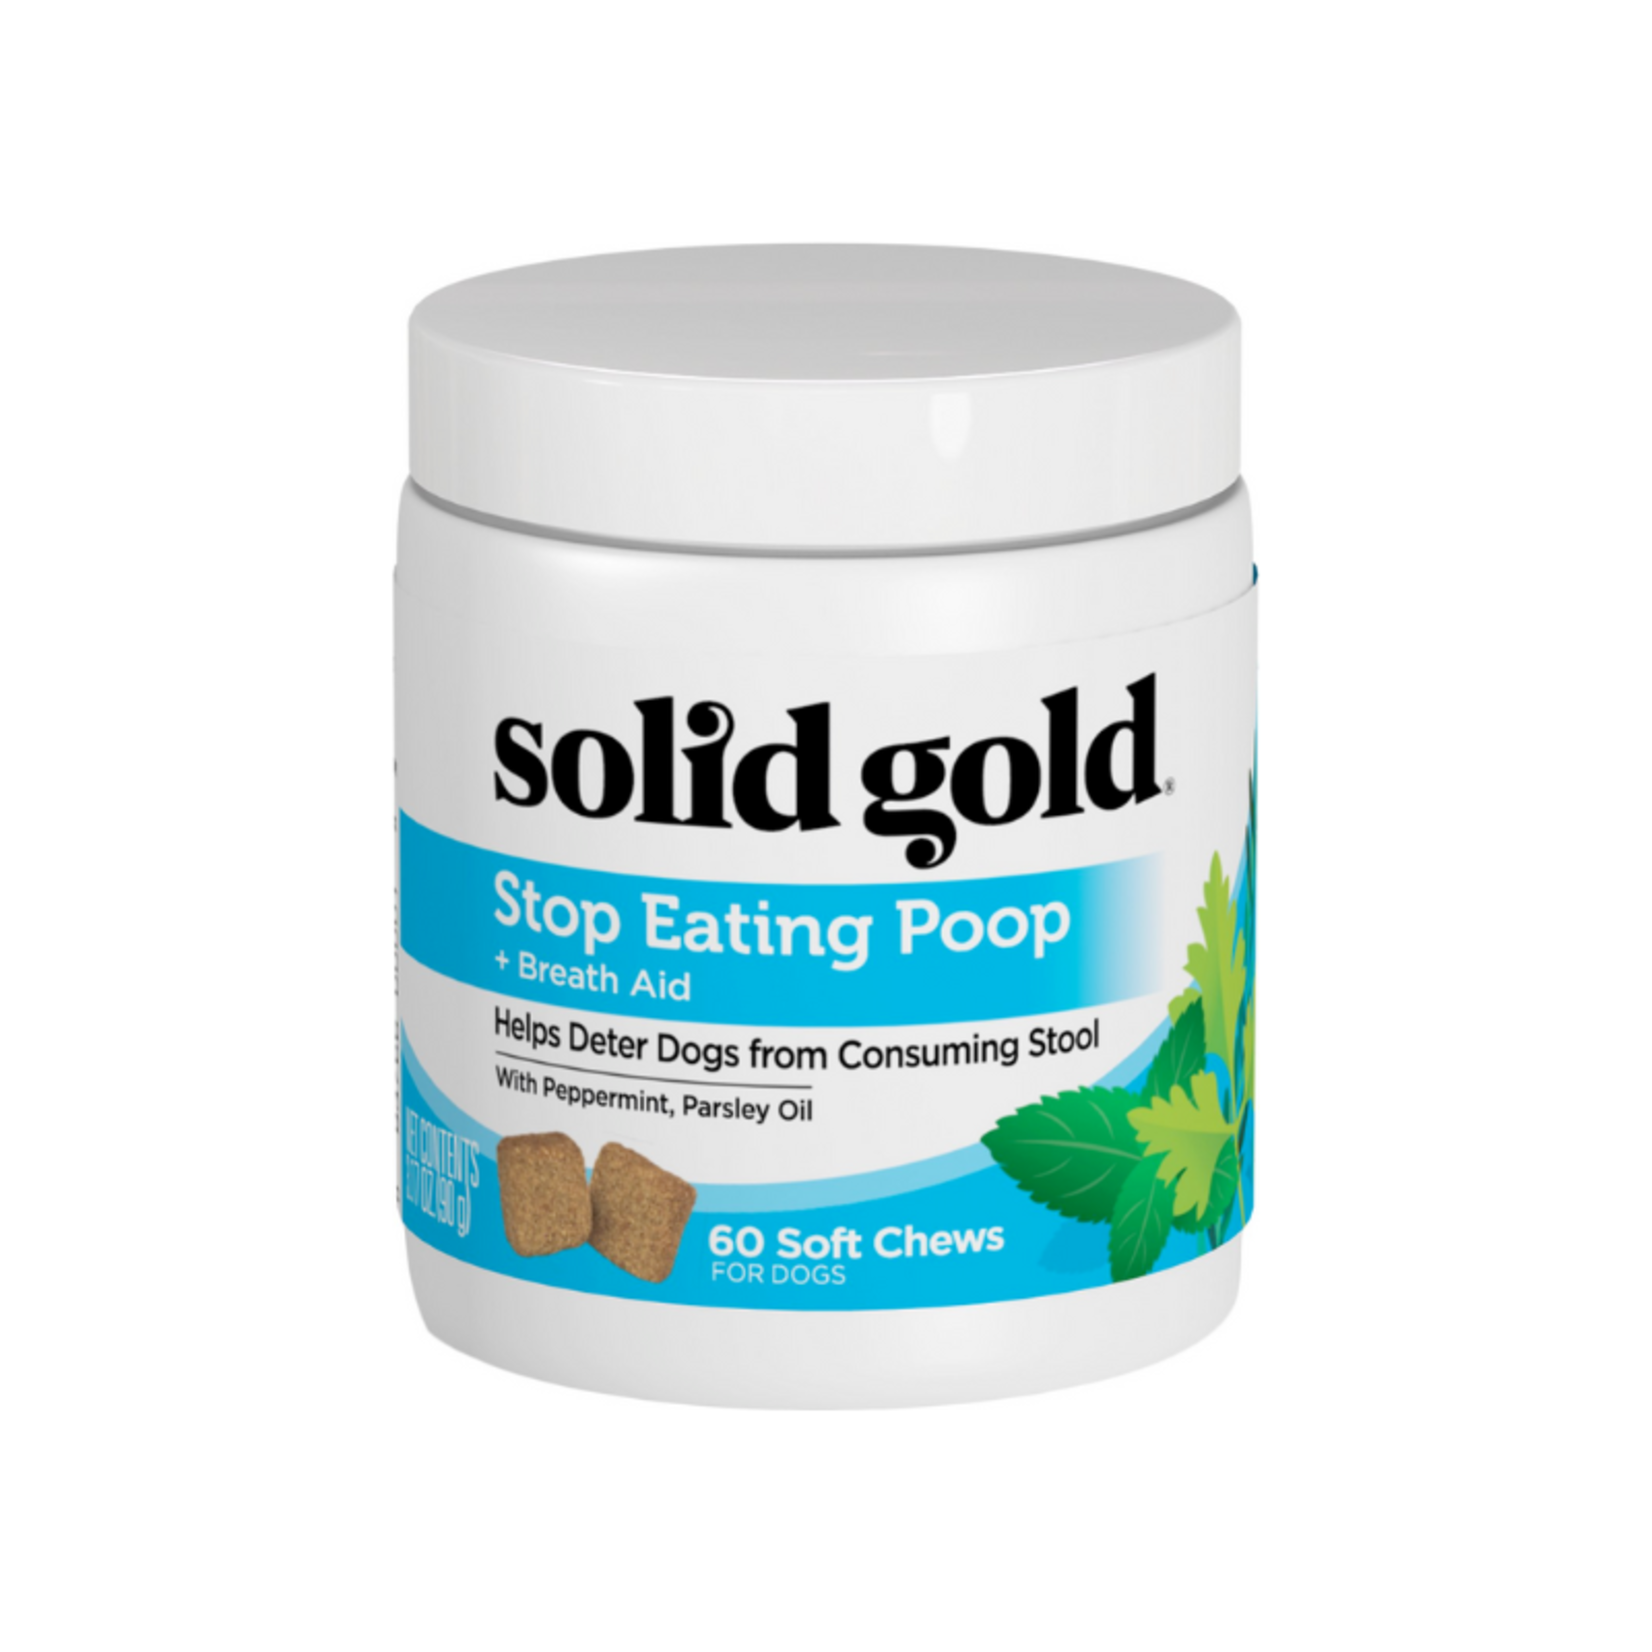 Solid Gold 3.2 oz. / 60 soft chews - Stop Eating Poop - Solid Gold